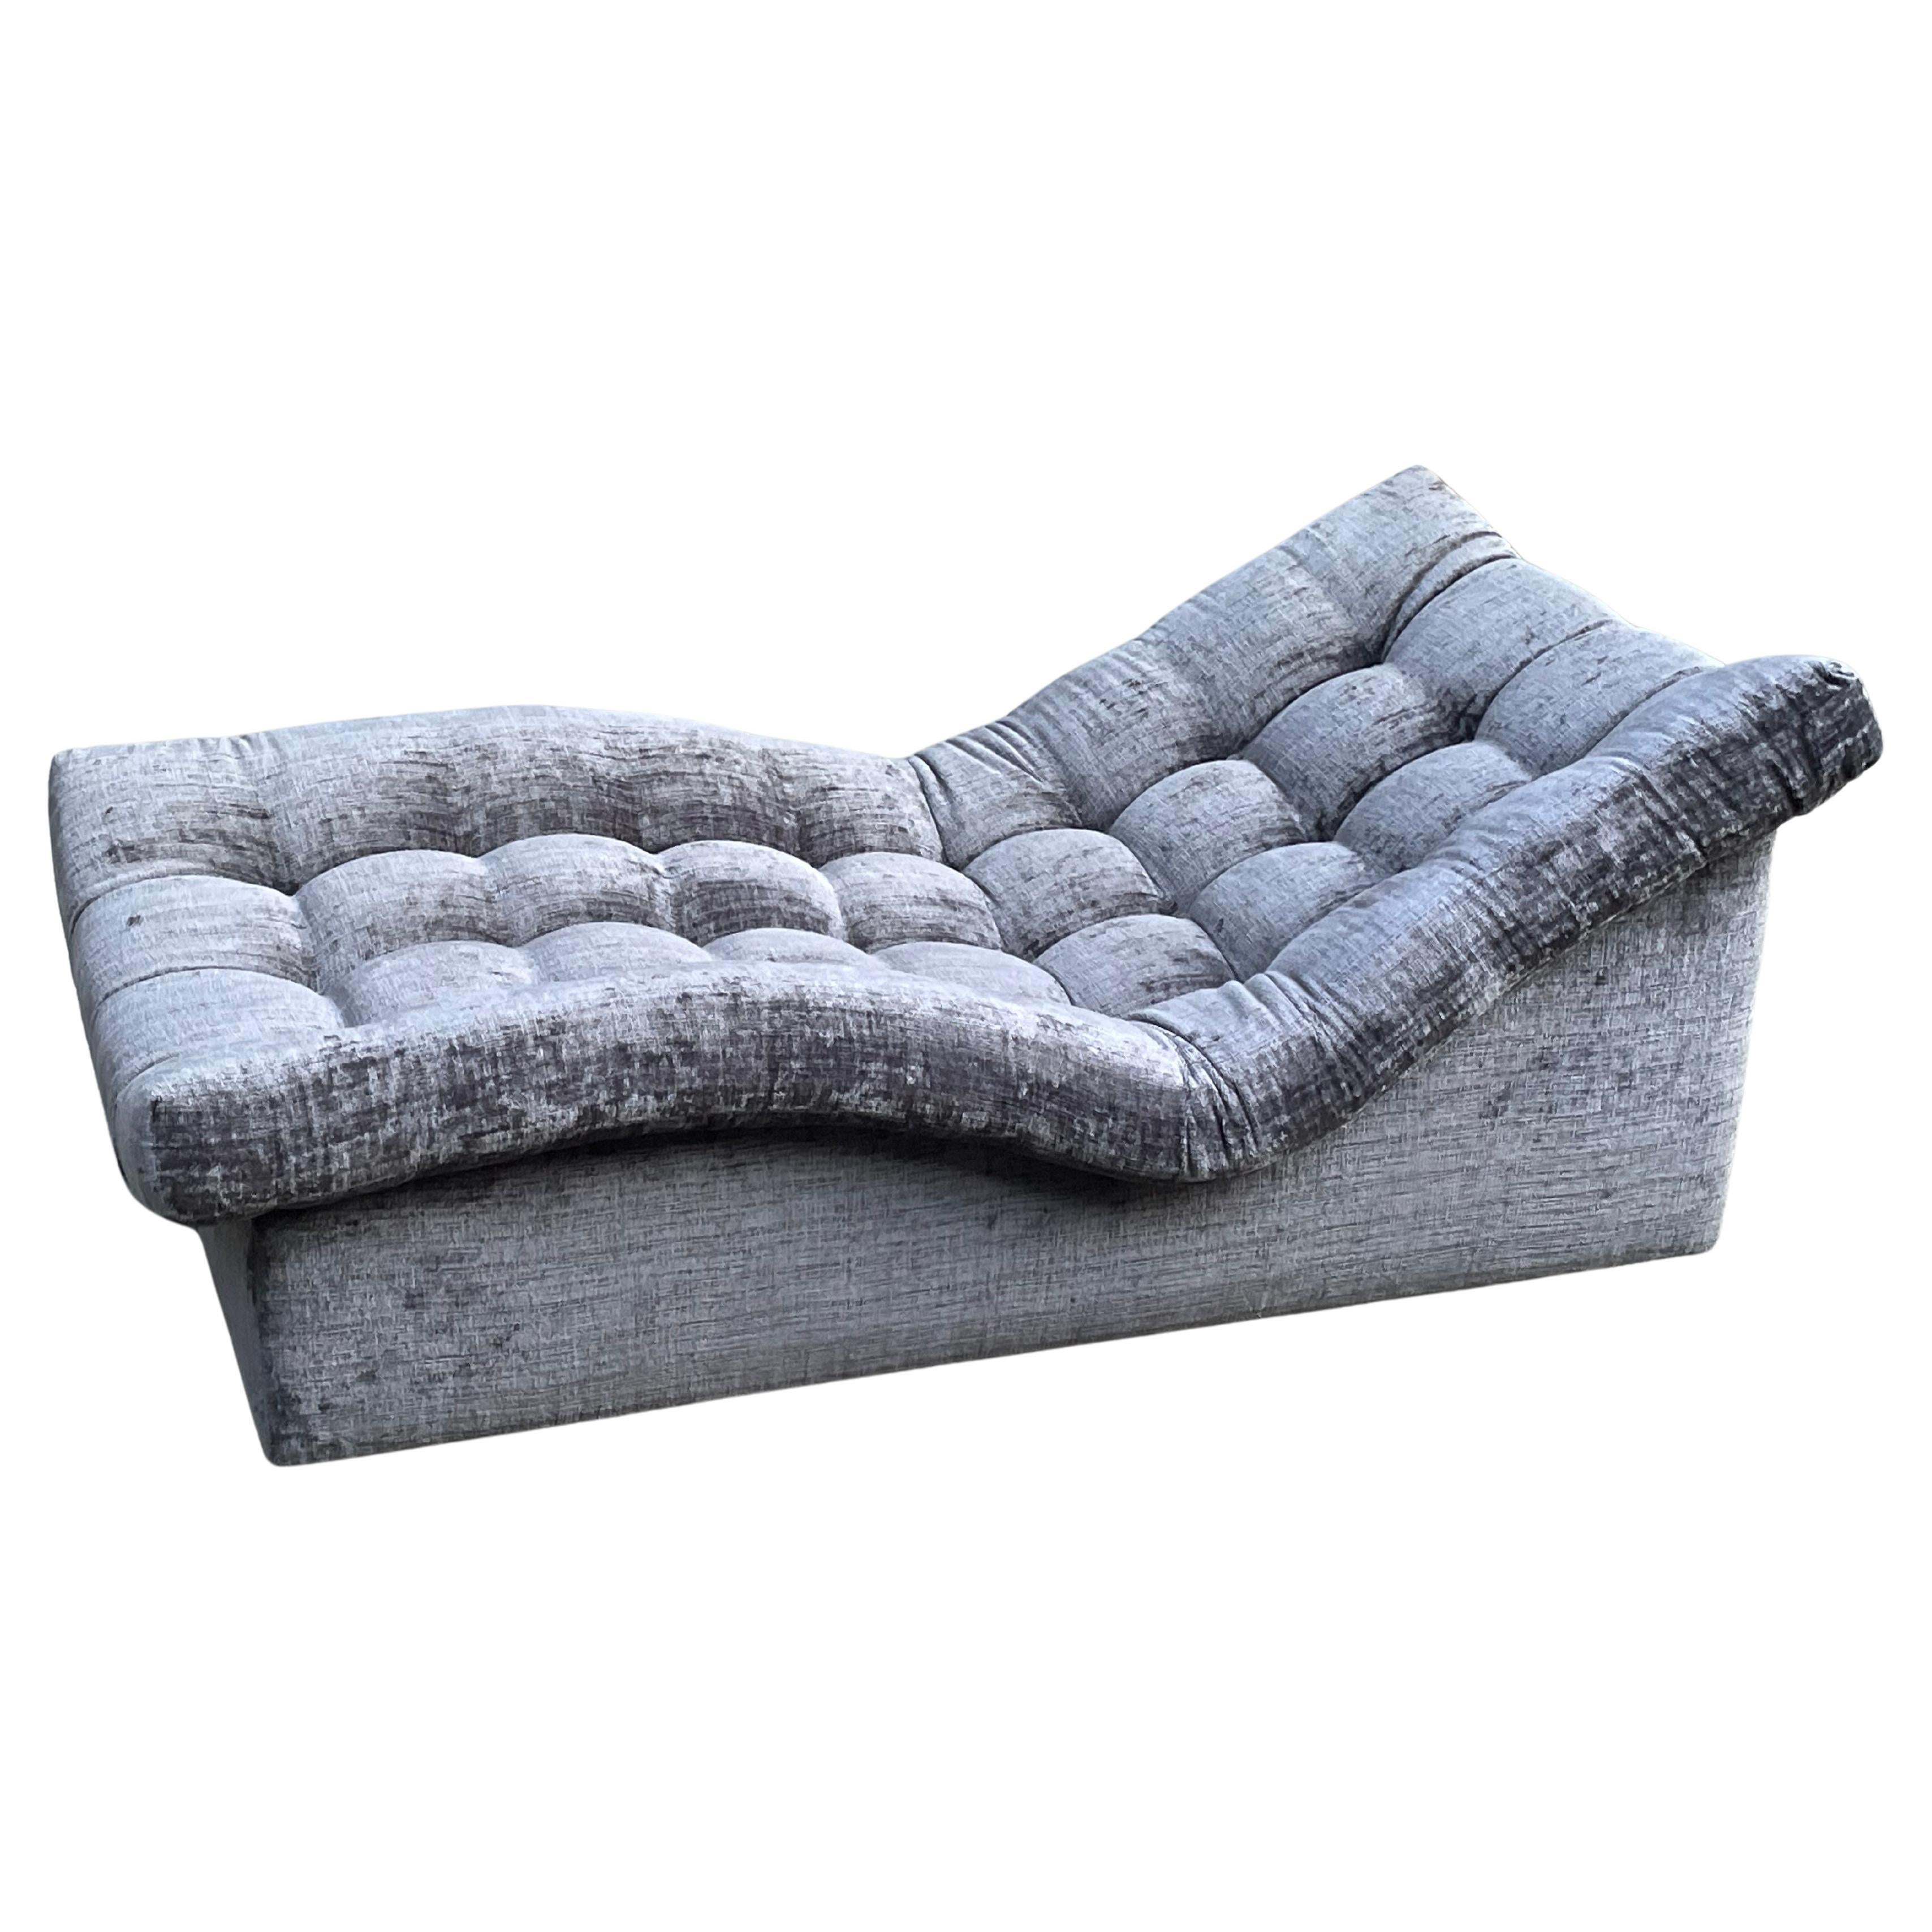 Magnificent tufted velvet mid-century chaise in grey velvet. Adrian Pearsall style chair. This is just wow. Great lines on this chaise.

Extremely good condition. The original fabric is in excellent condition.

DIMENSIONS
Overall width: 68